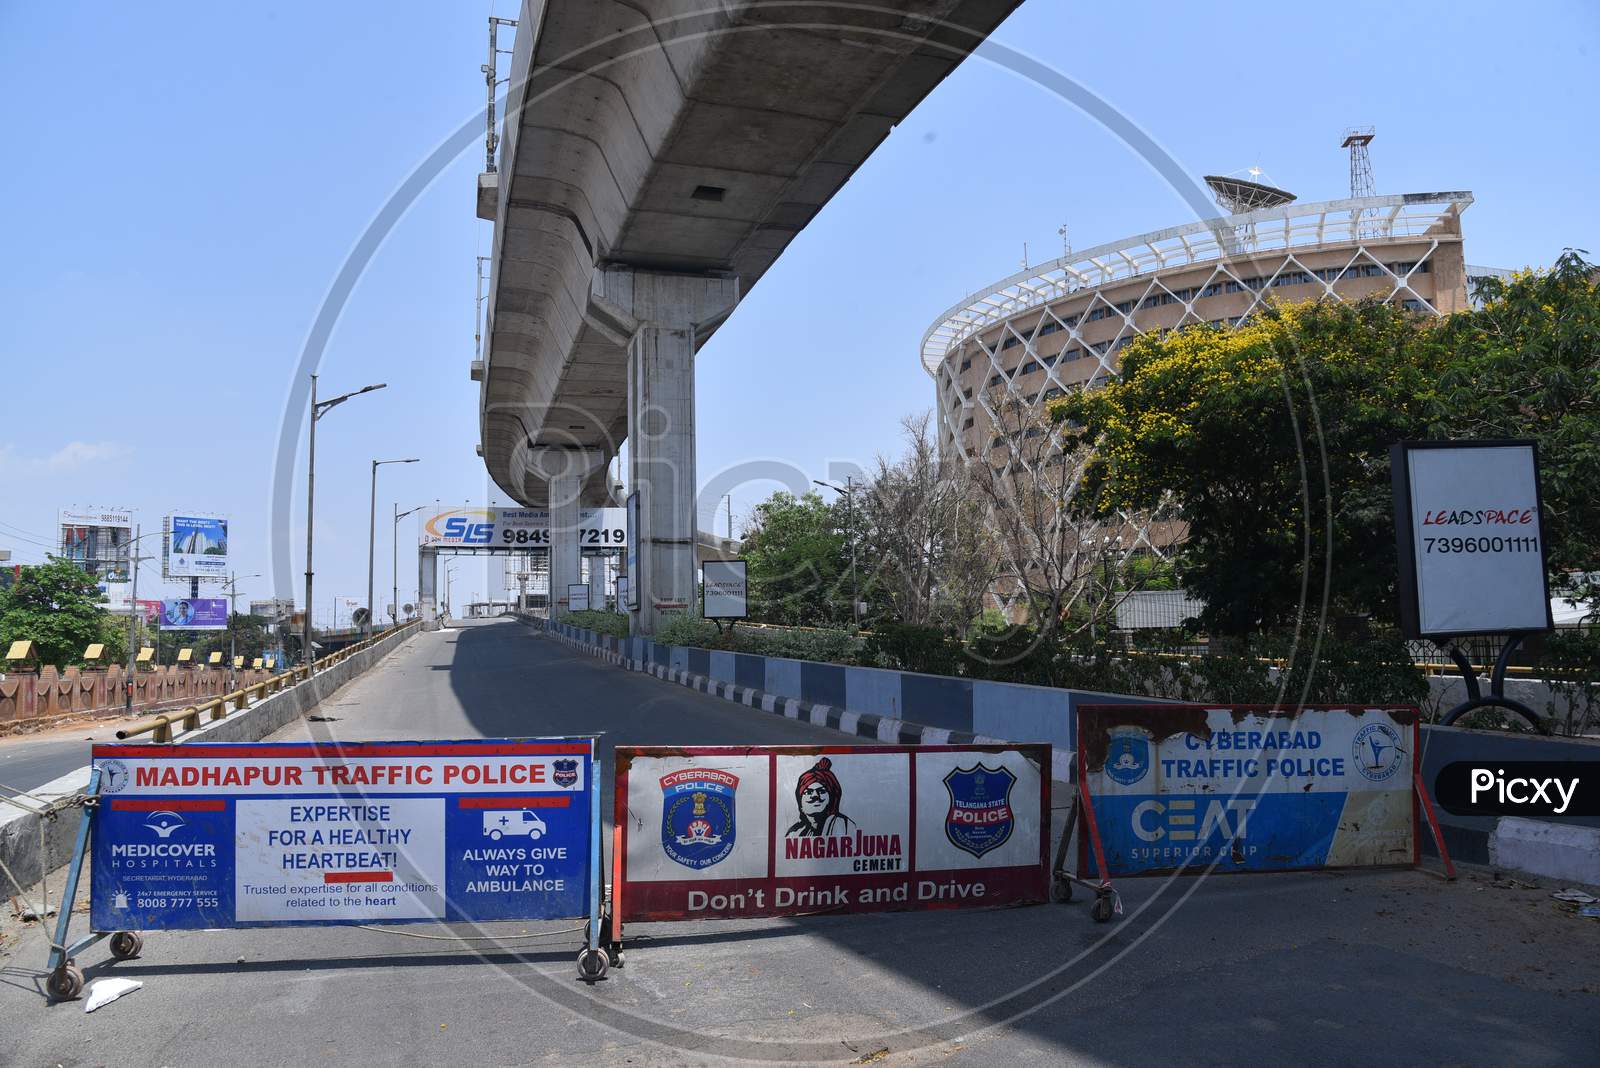 Hitech City flyover closed during nationwide lockdown amid coronavirus pandemic spread in Hyderabad, April 9,2020.